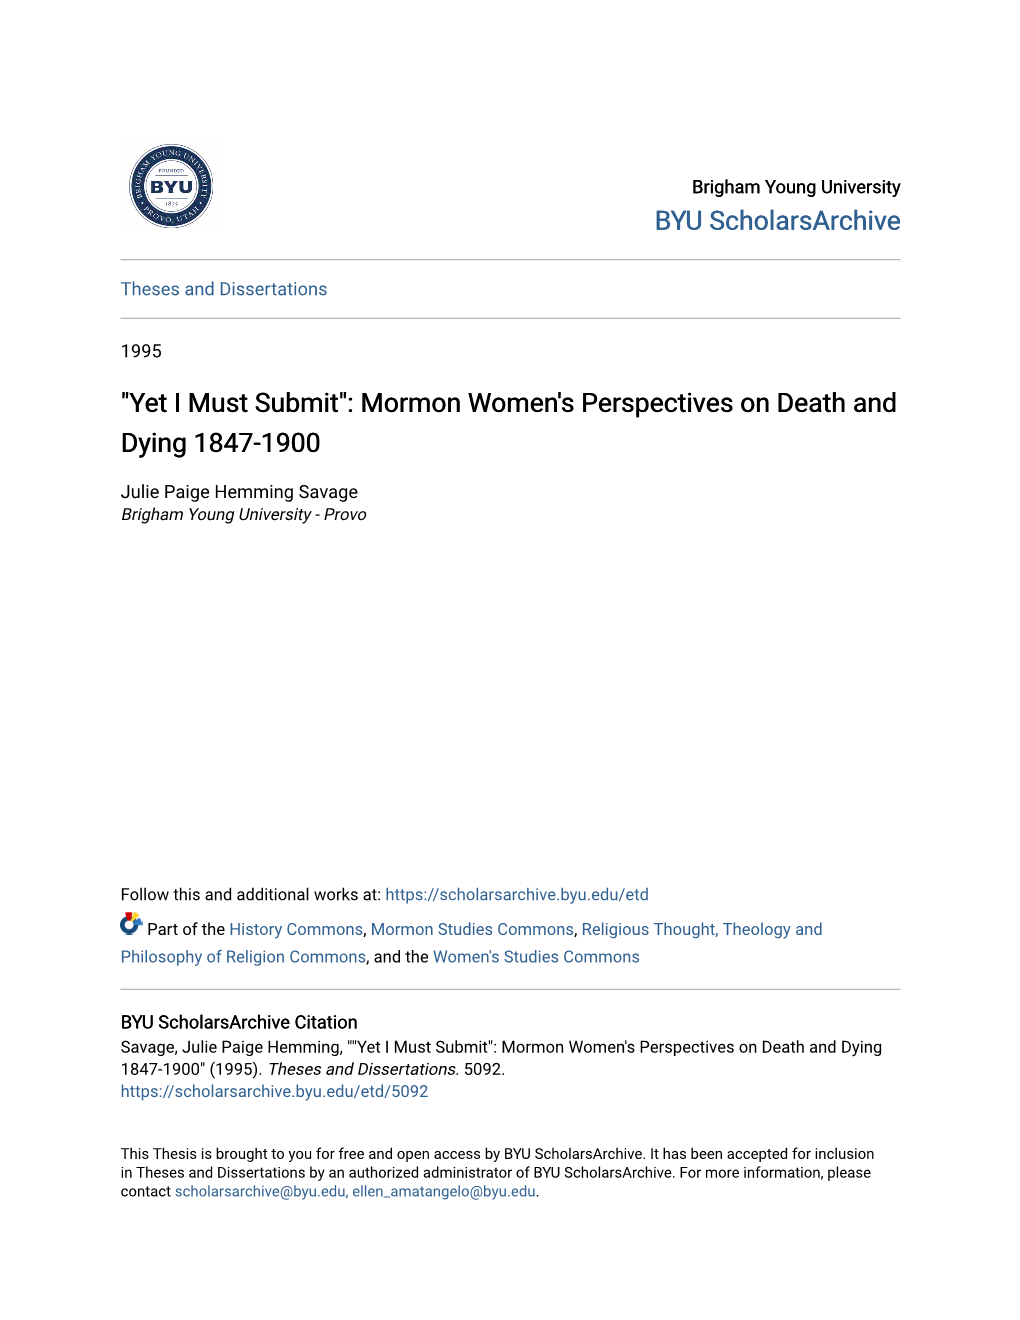 Mormon Women's Perspectives on Death and Dying 1847-1900